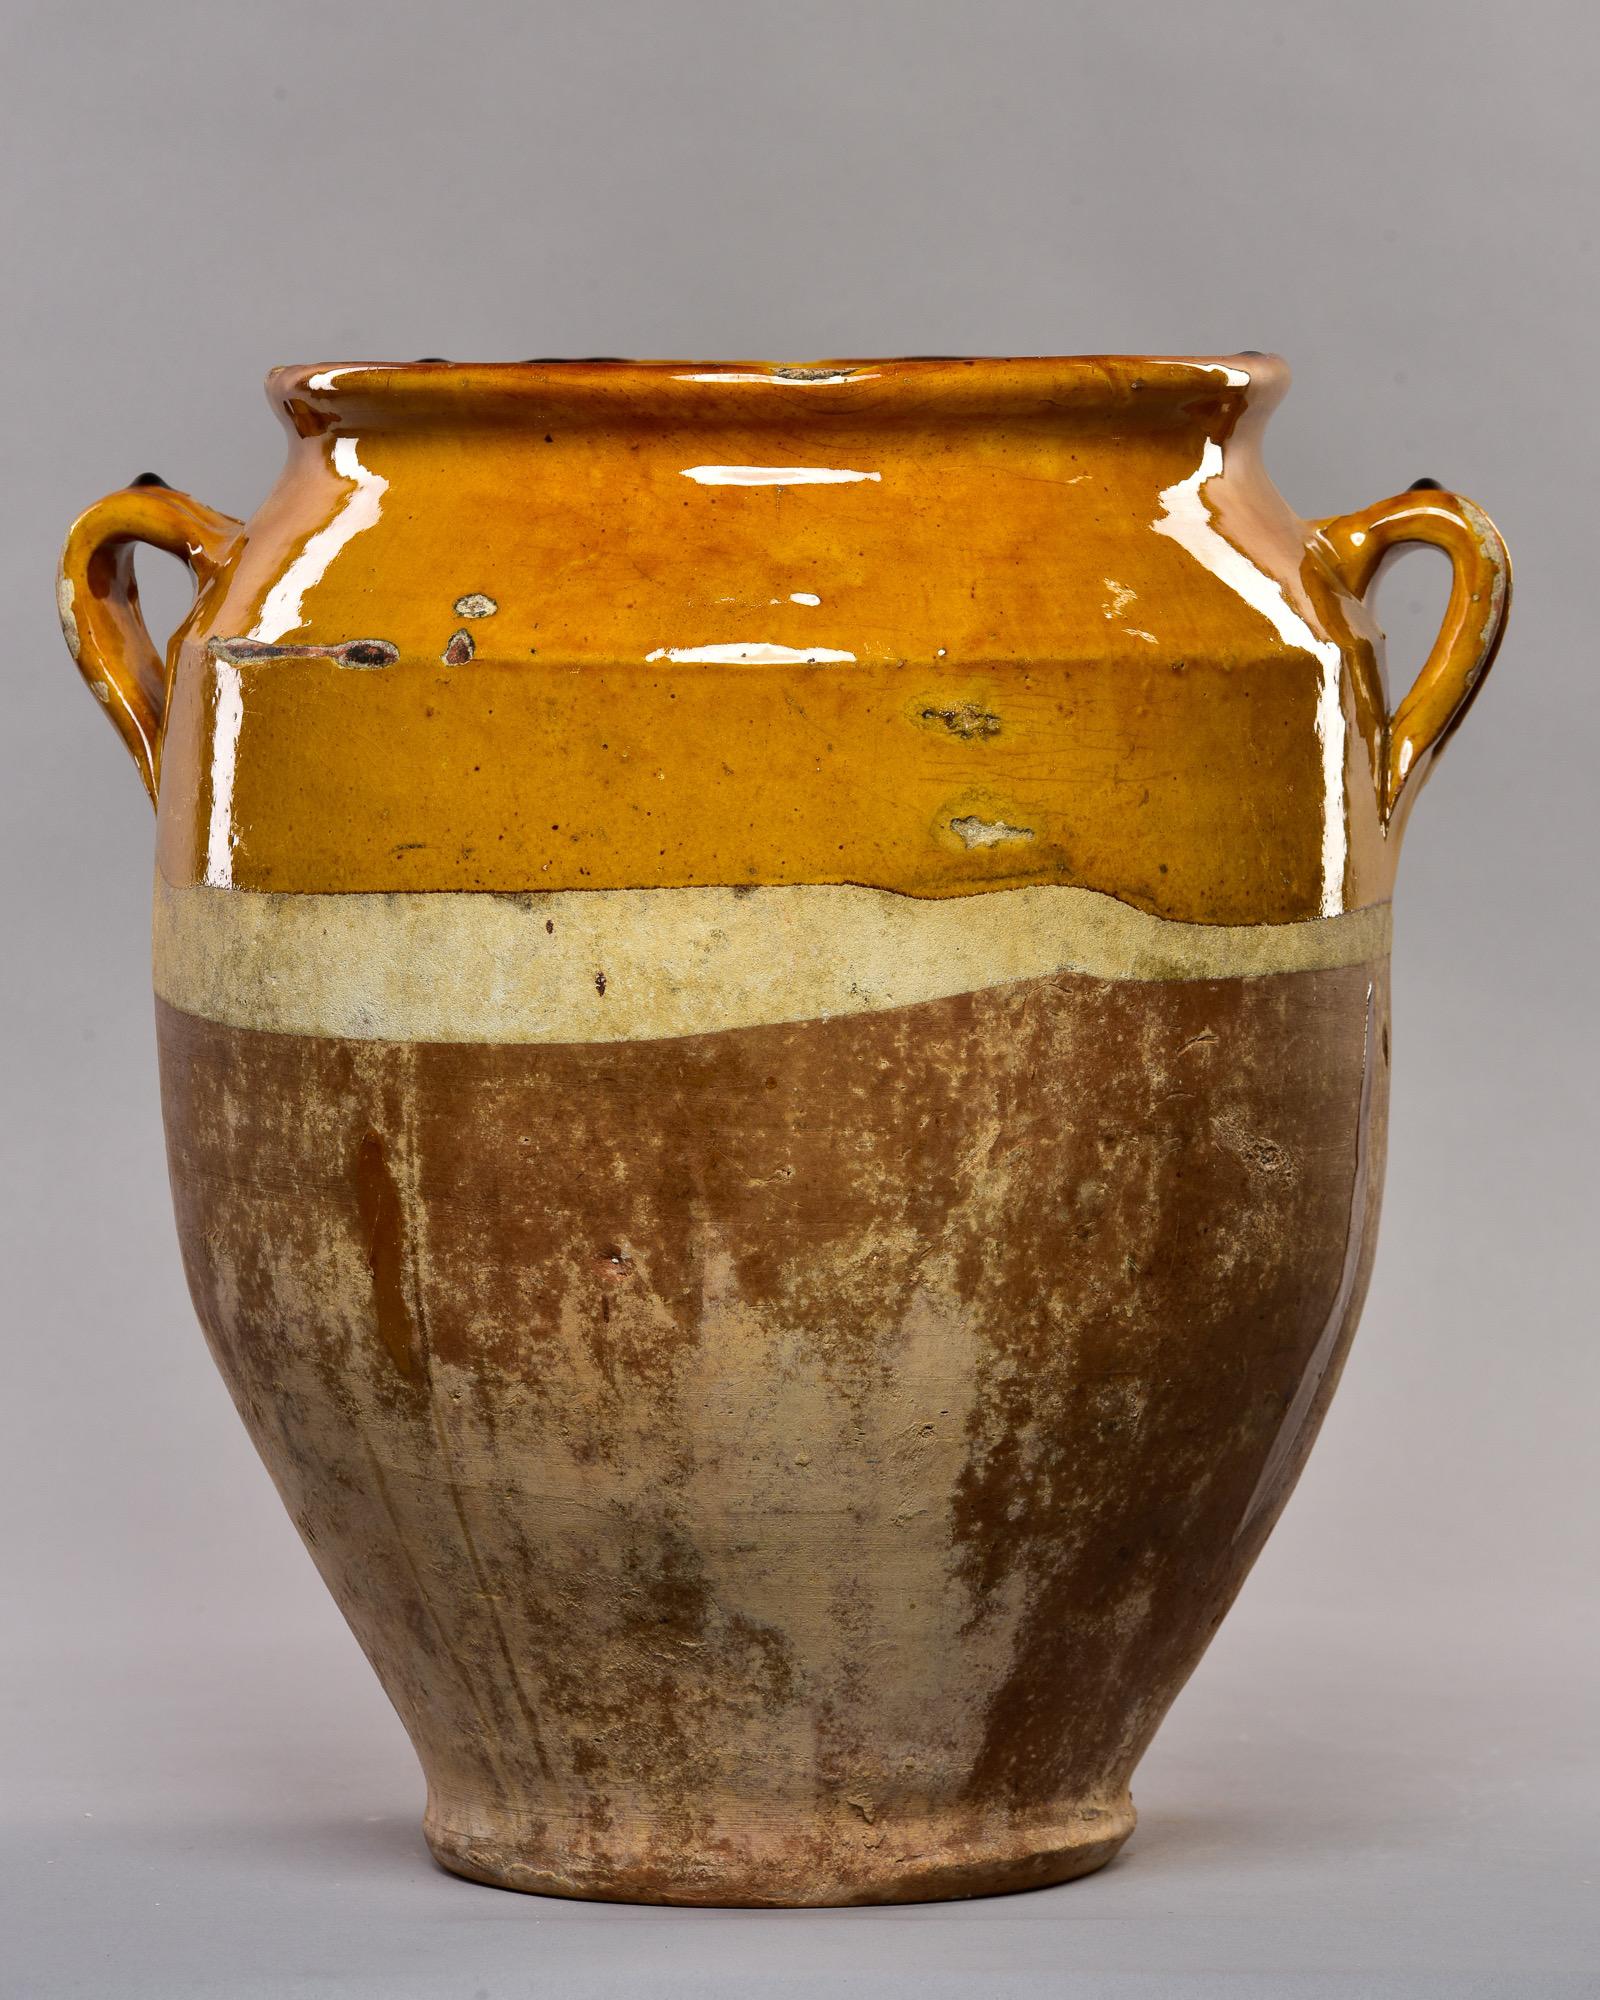 Circa 1920s large French confit pot with mustard colored glaze at top and two handles. Unknown maker.
 